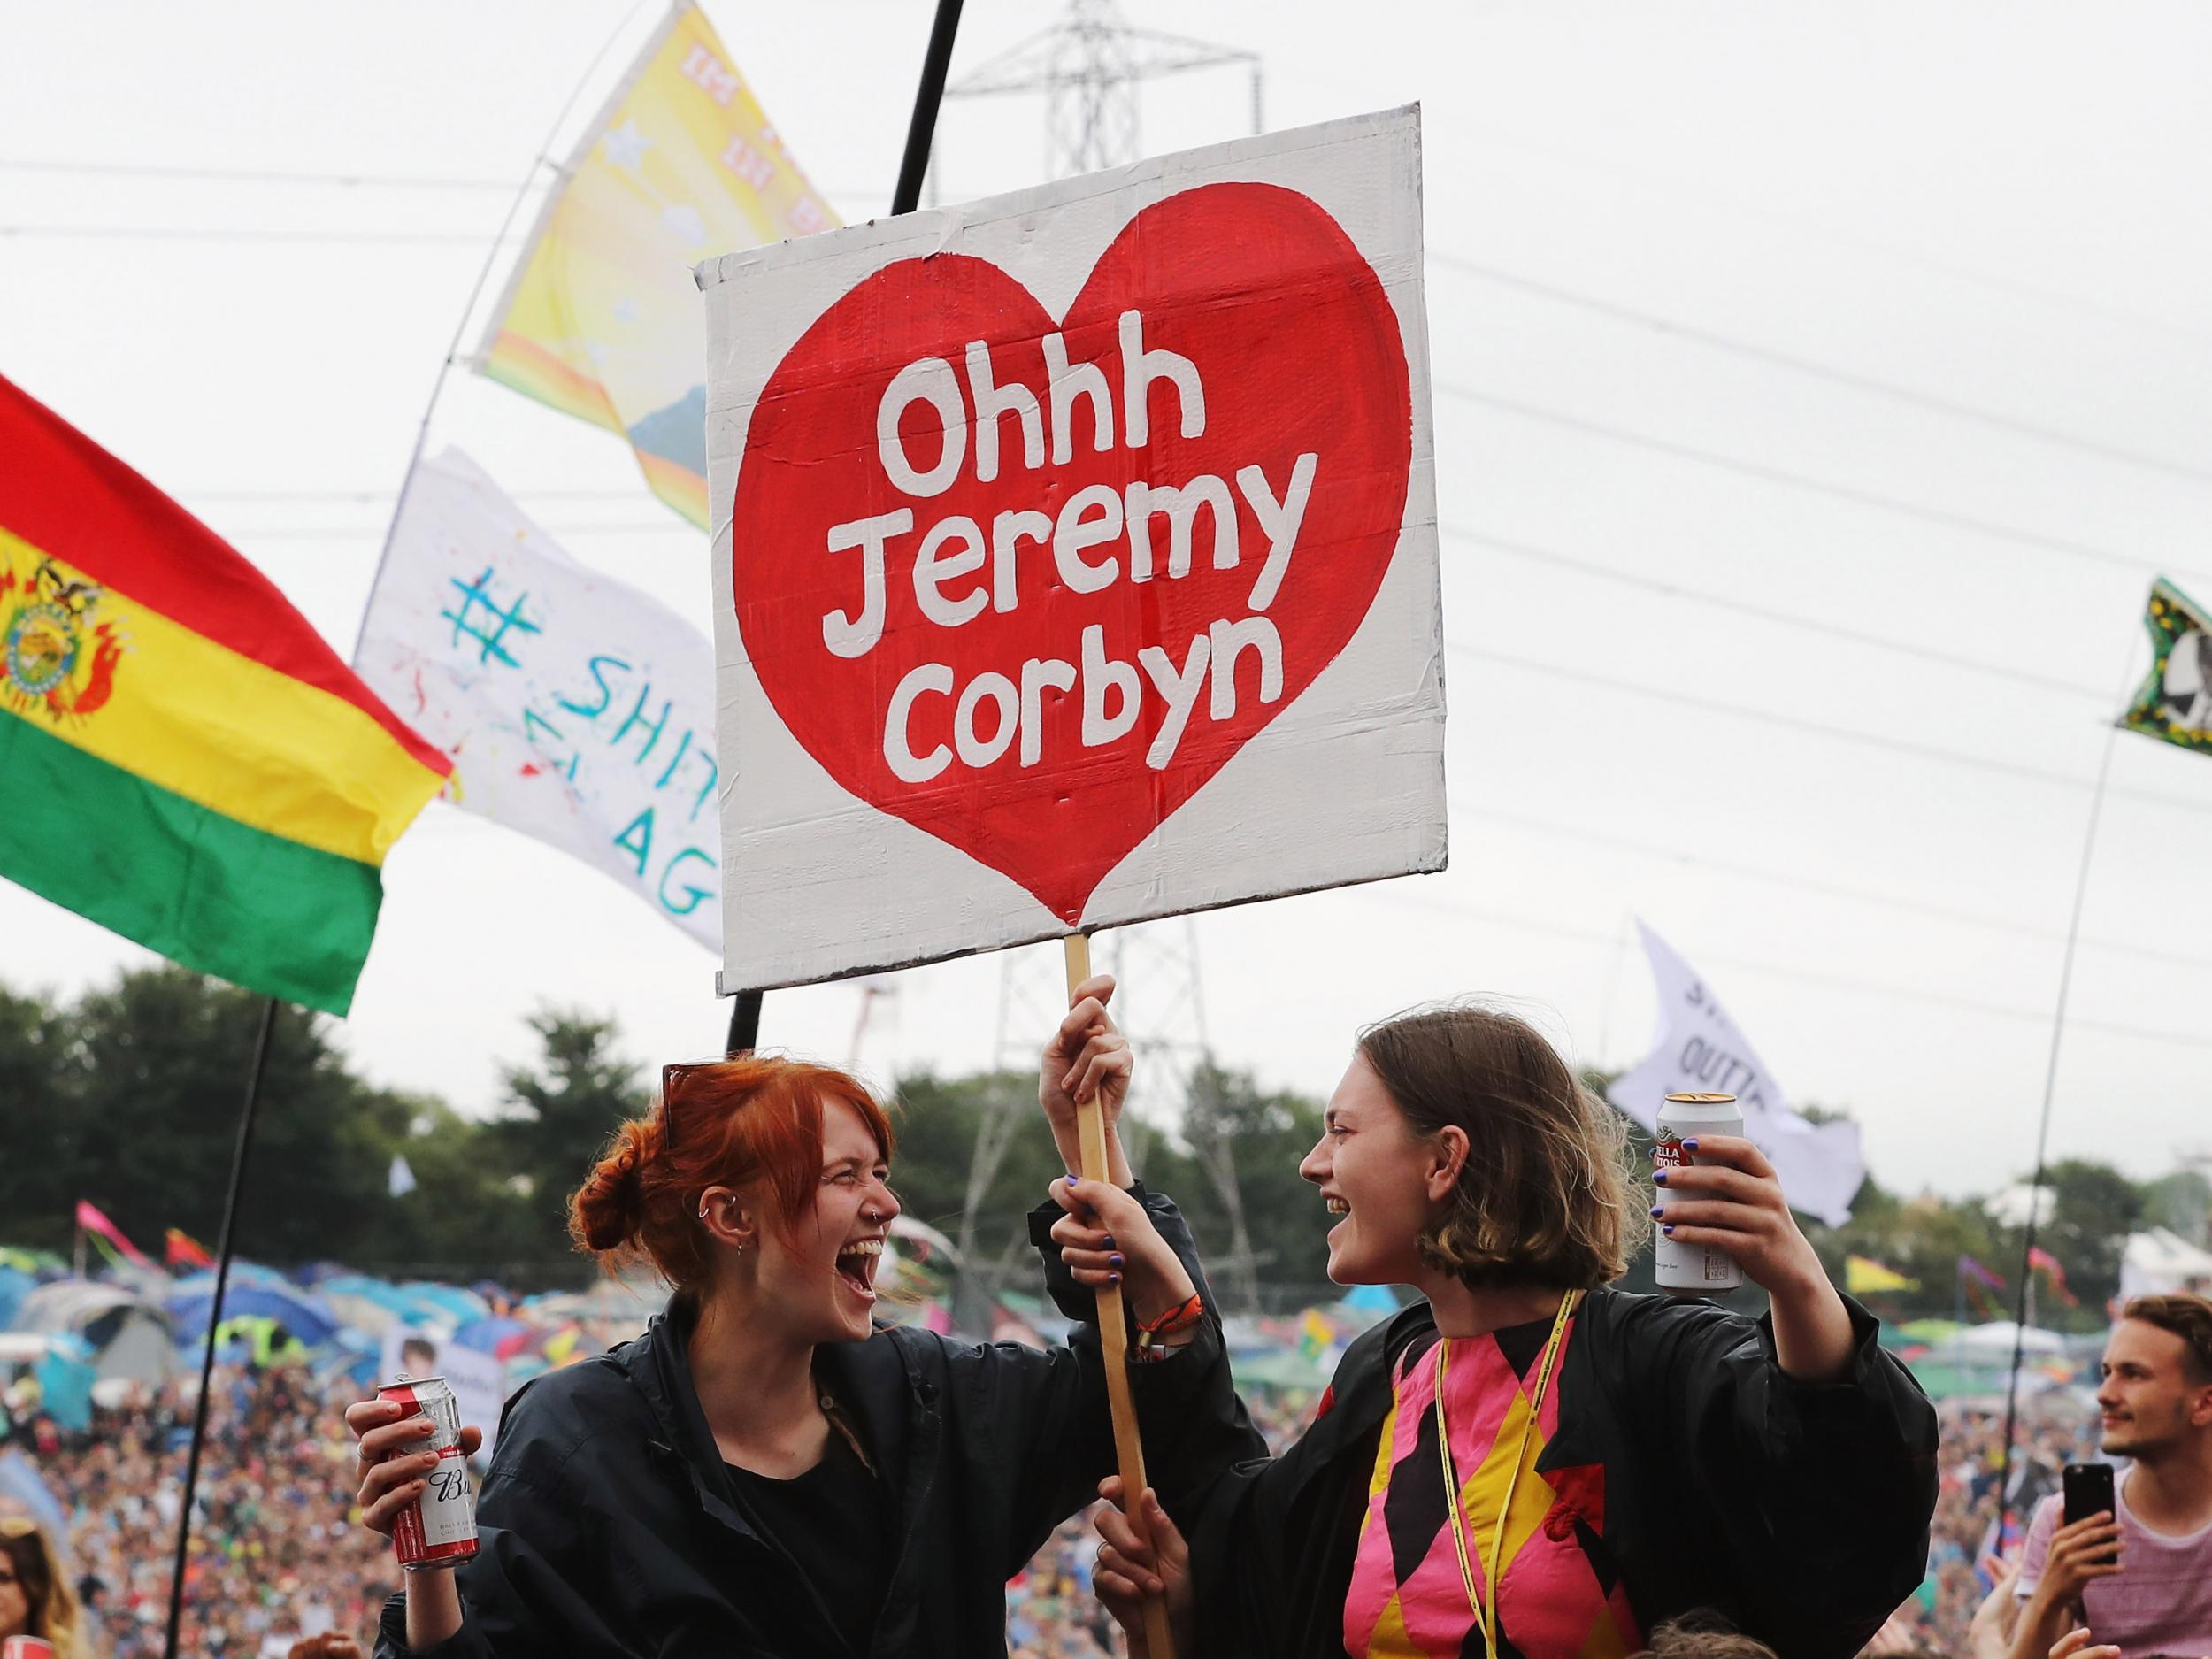 The Labour leader’s appearance at Glastonbury helped fuel the idea that he had increased youth turnout, researchers said